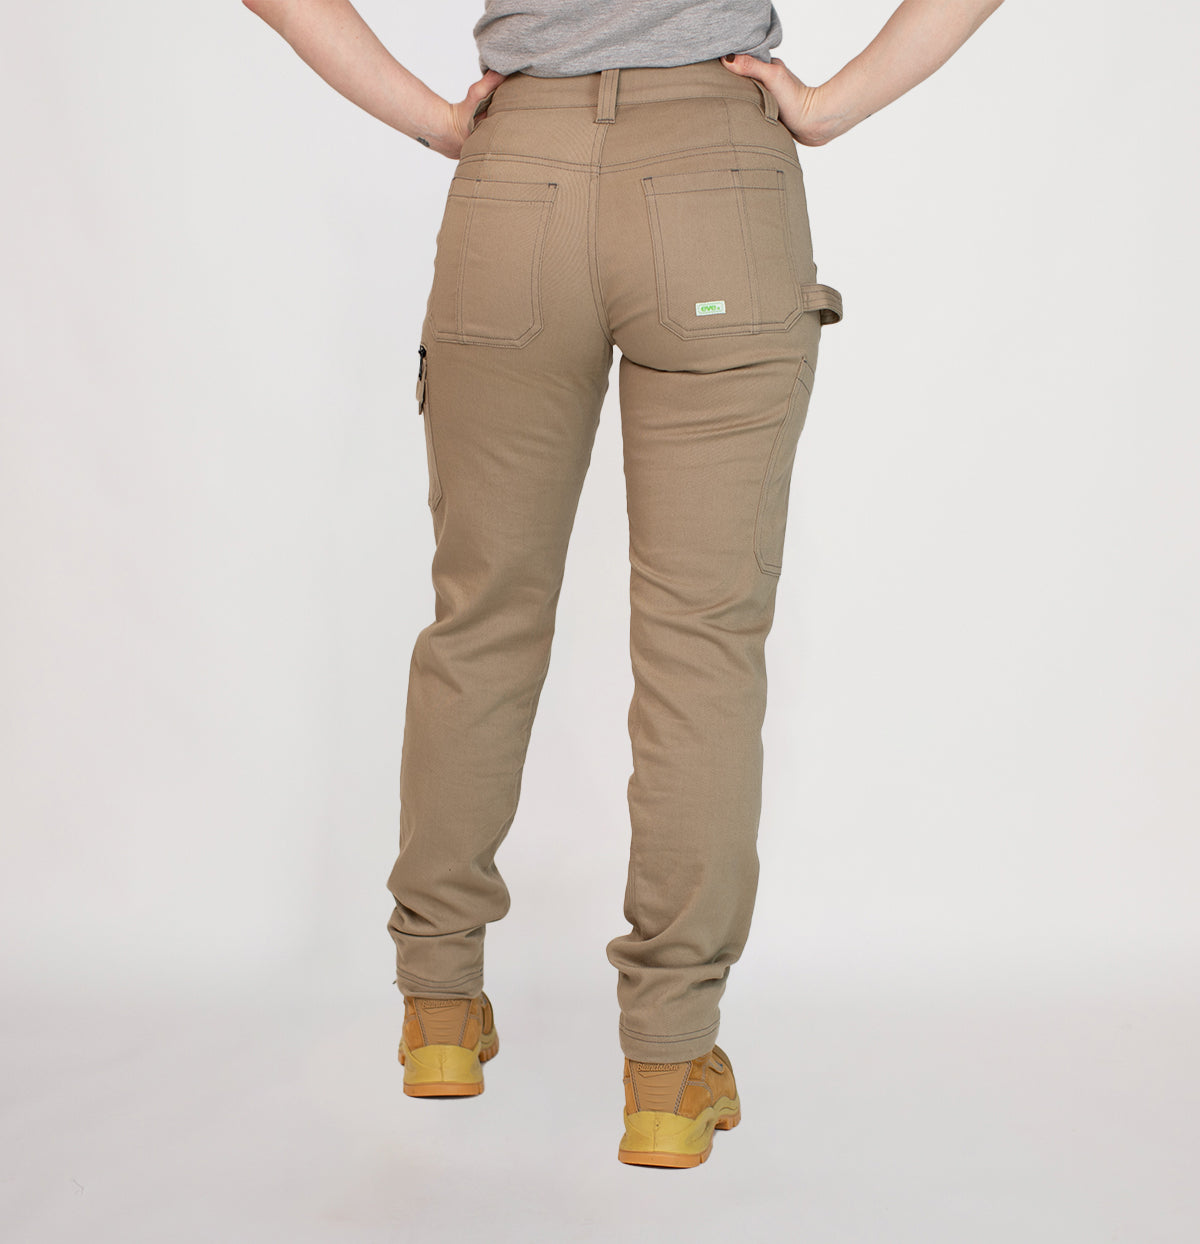 Women's Pants - Jeans, Joggers, Linen, Chinos - Sussan